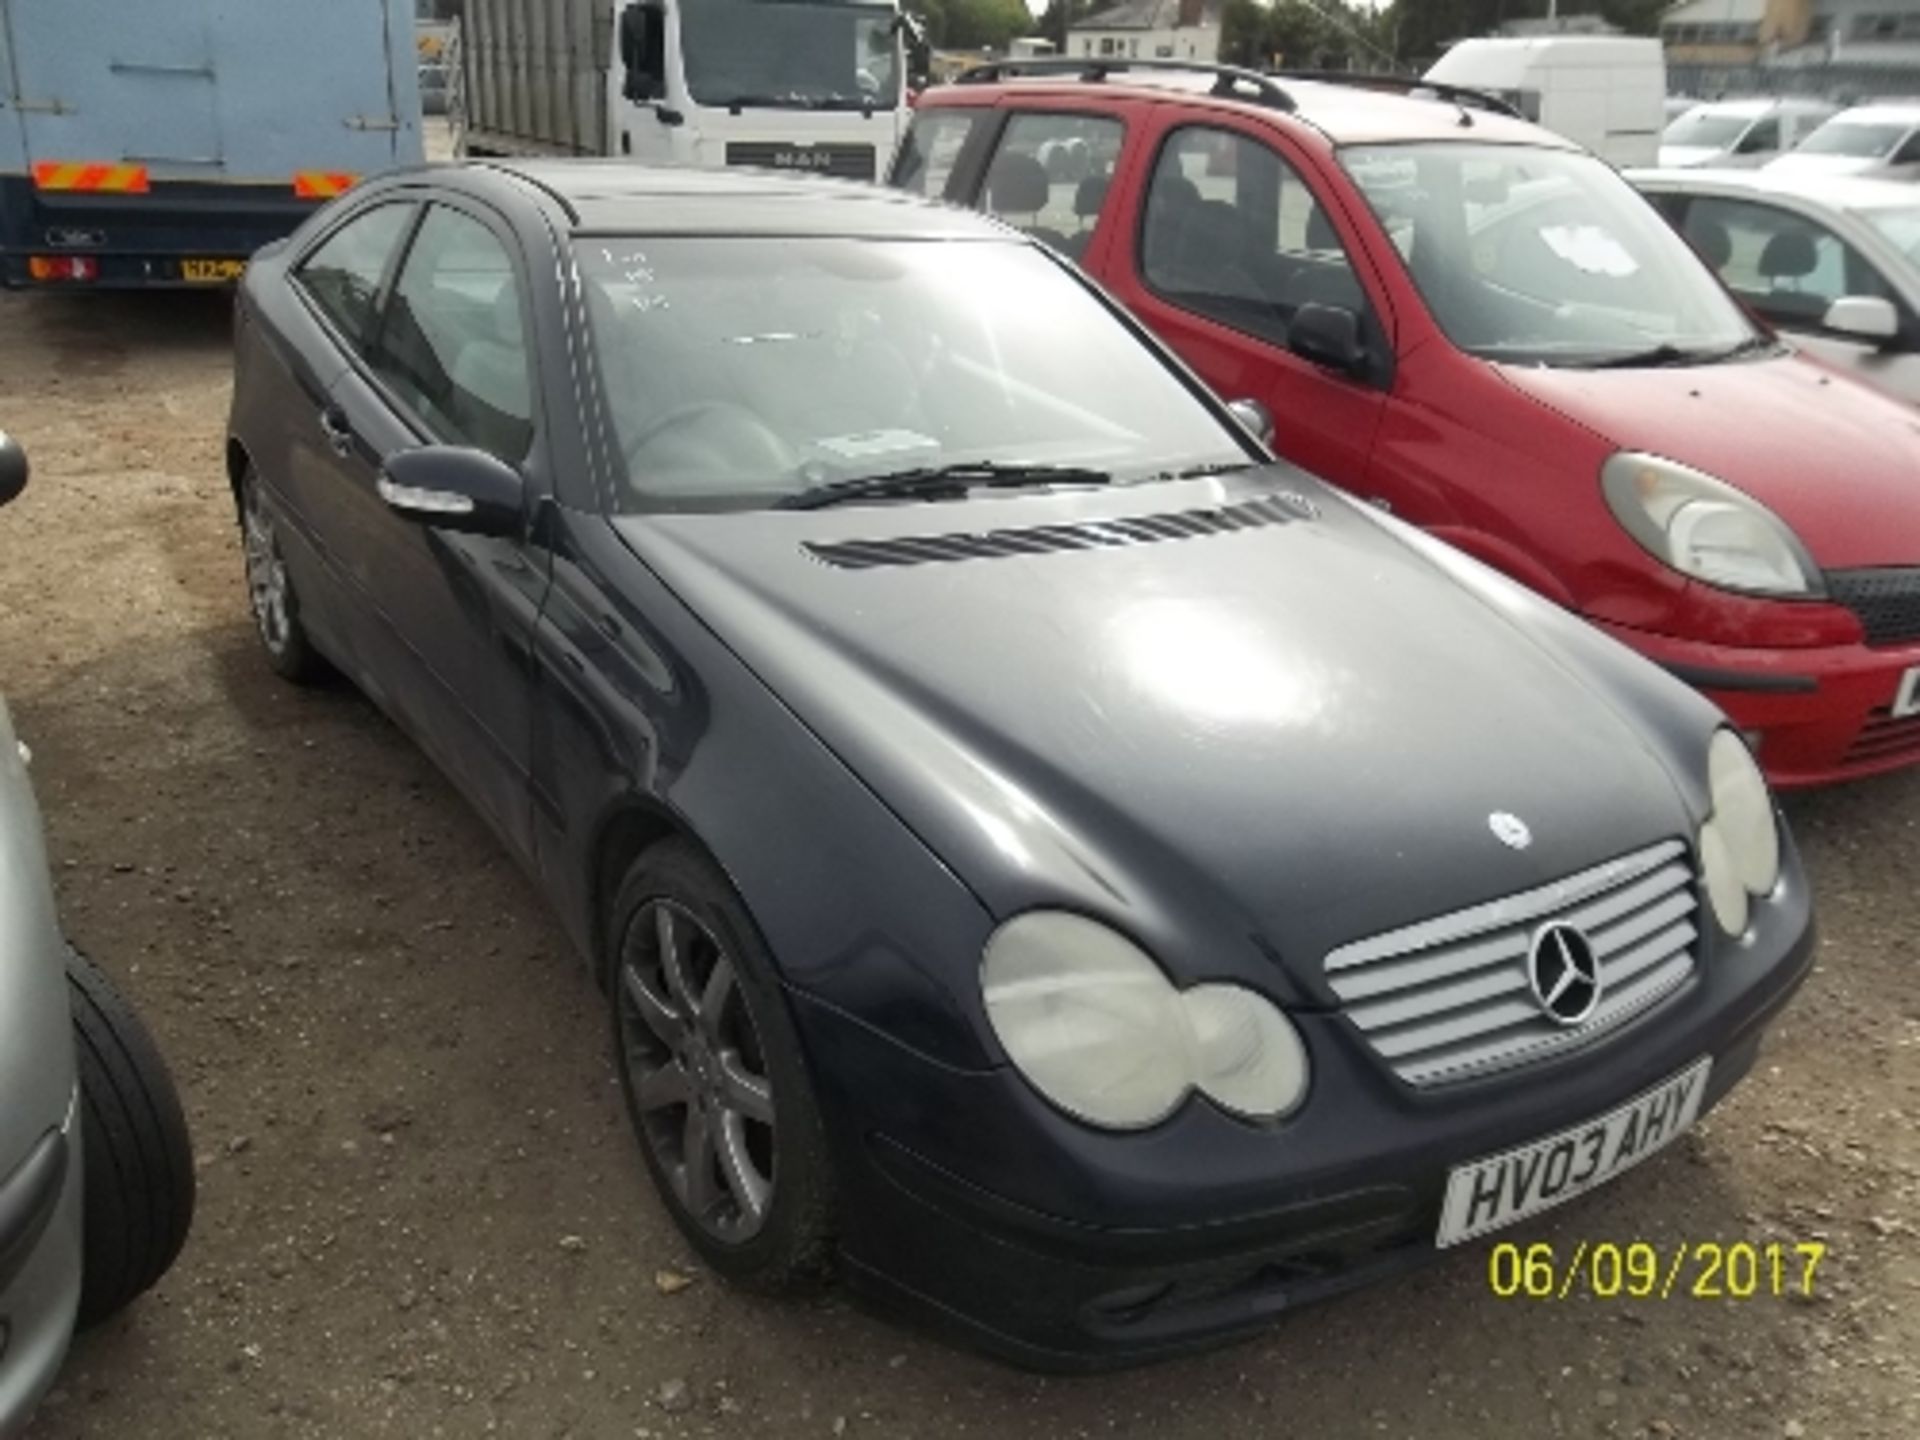 Mercedes C220 CDI SE Coupe - HV03 AHY Date of registration: 27.03.2003 2148cc, diesel, 5 speed auto, - Image 2 of 4